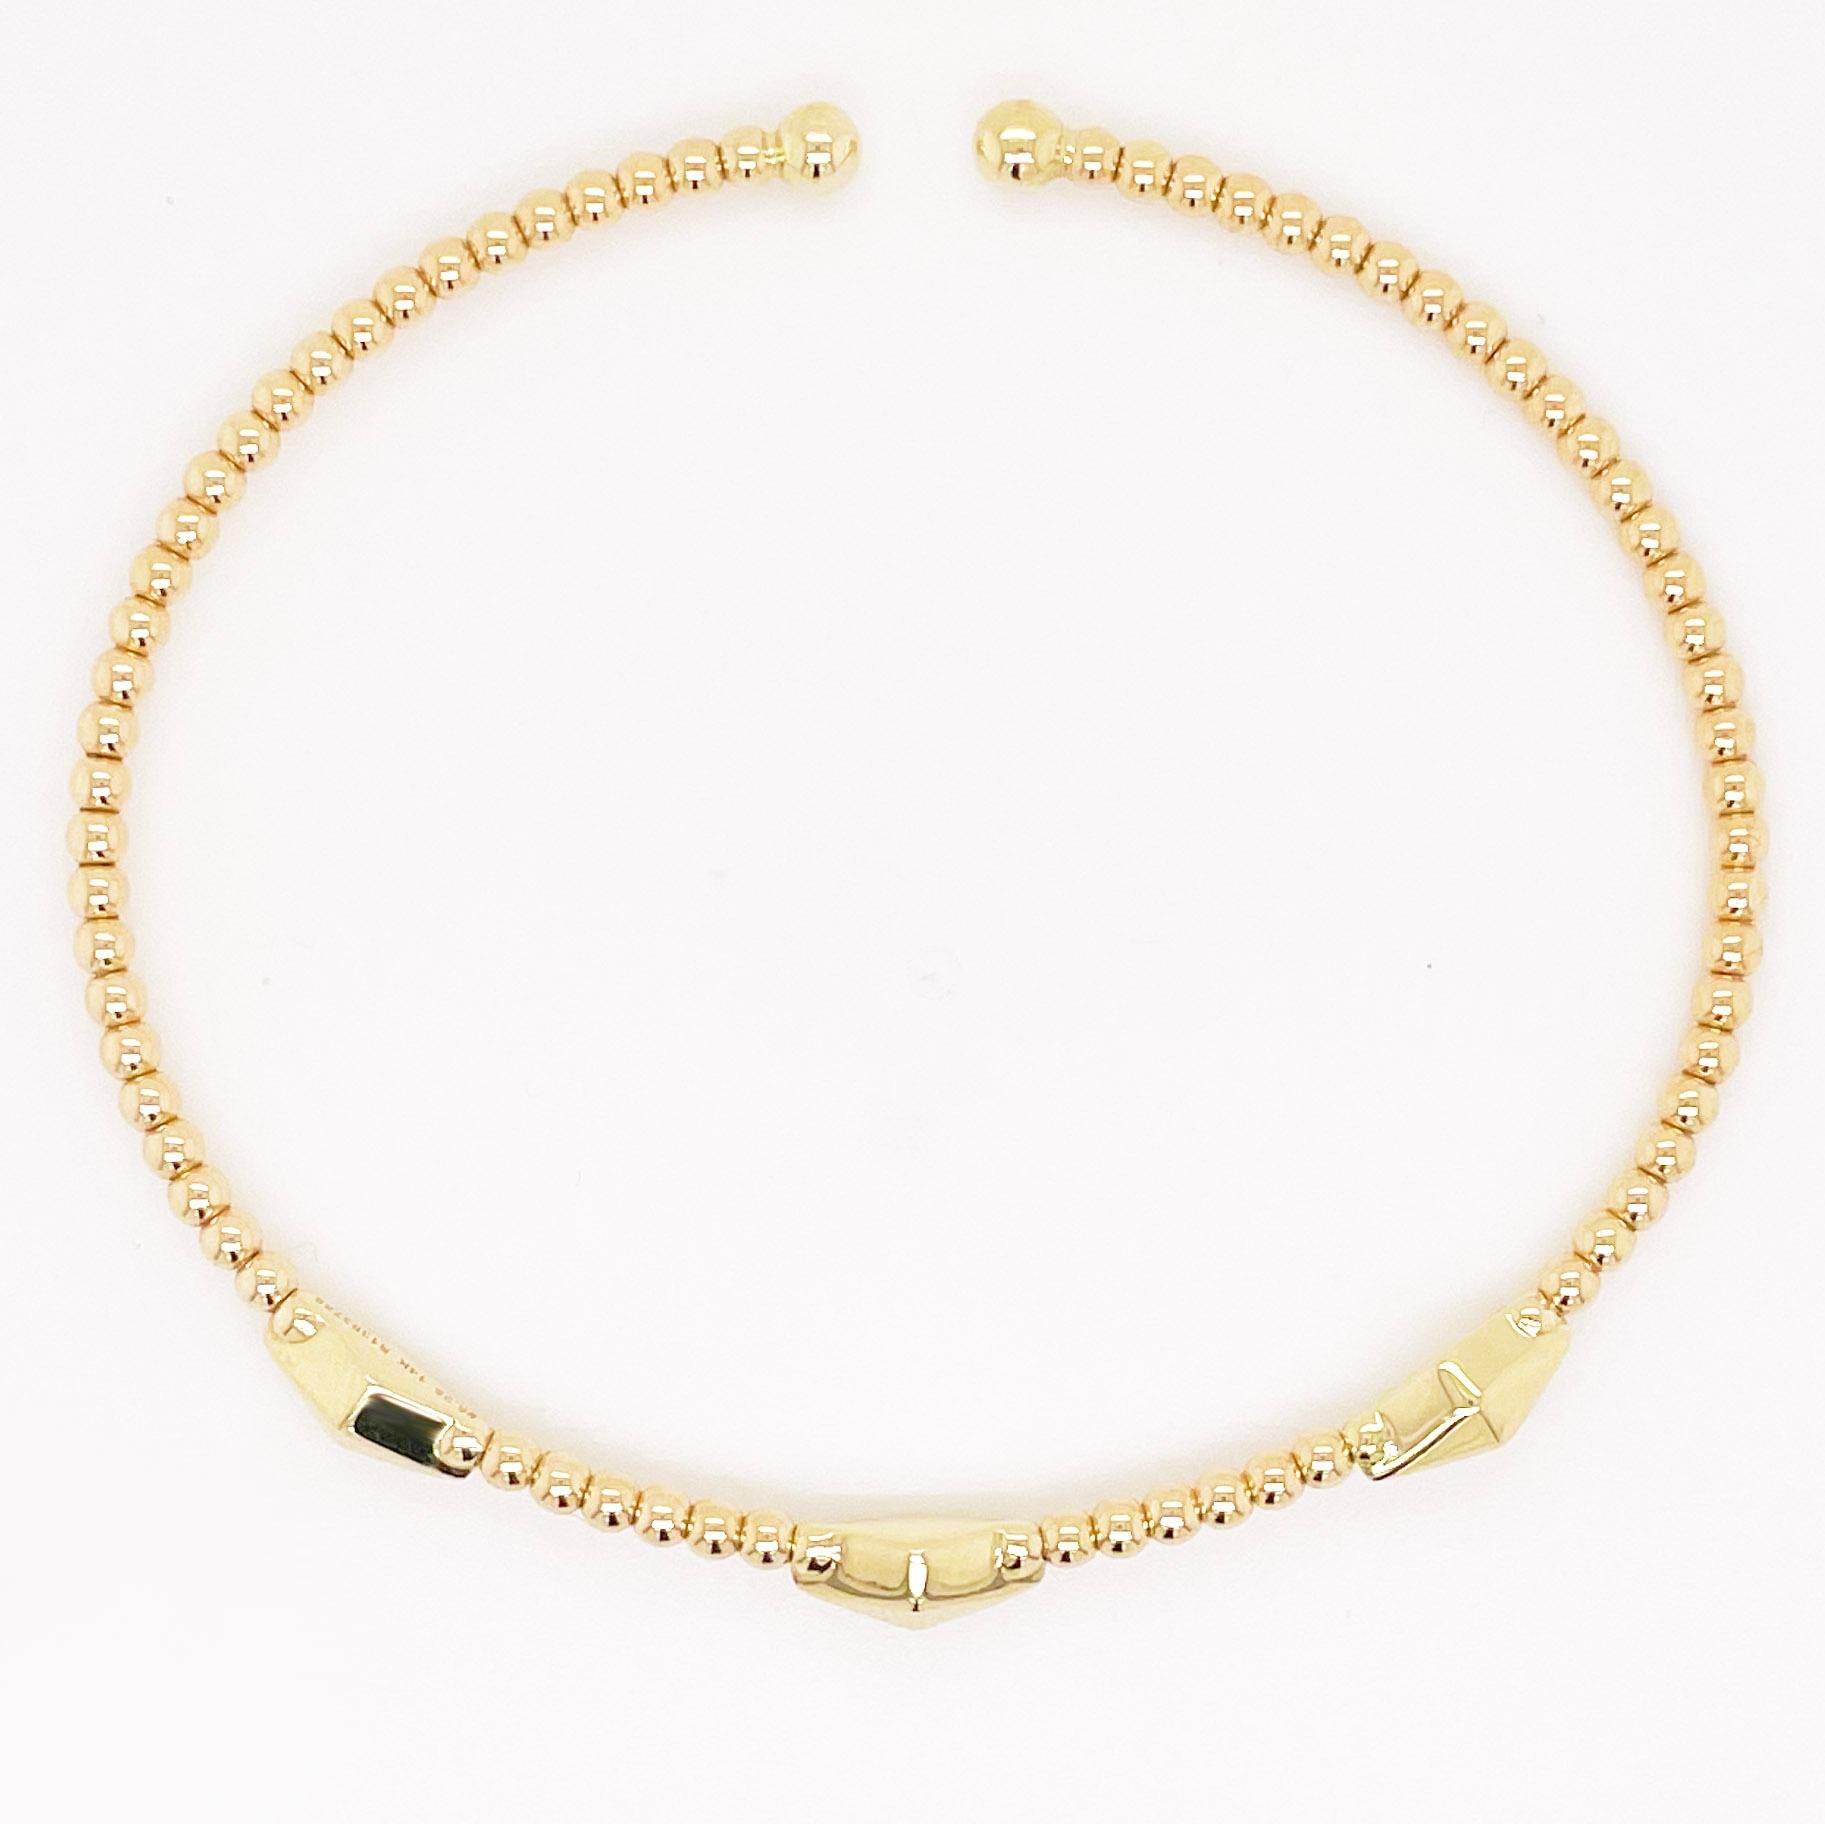 The details for this gorgeous bracelet are listed below:

Bracelet Type: Bangle, Cuff
Metal Quality: 14K Yellow Gold
Length: 6 cm (available in 3 sizes)
Width: 2.19 - 4.12 millimeters
Clasp: Flexible Bangle
Bangle Size: 6.25